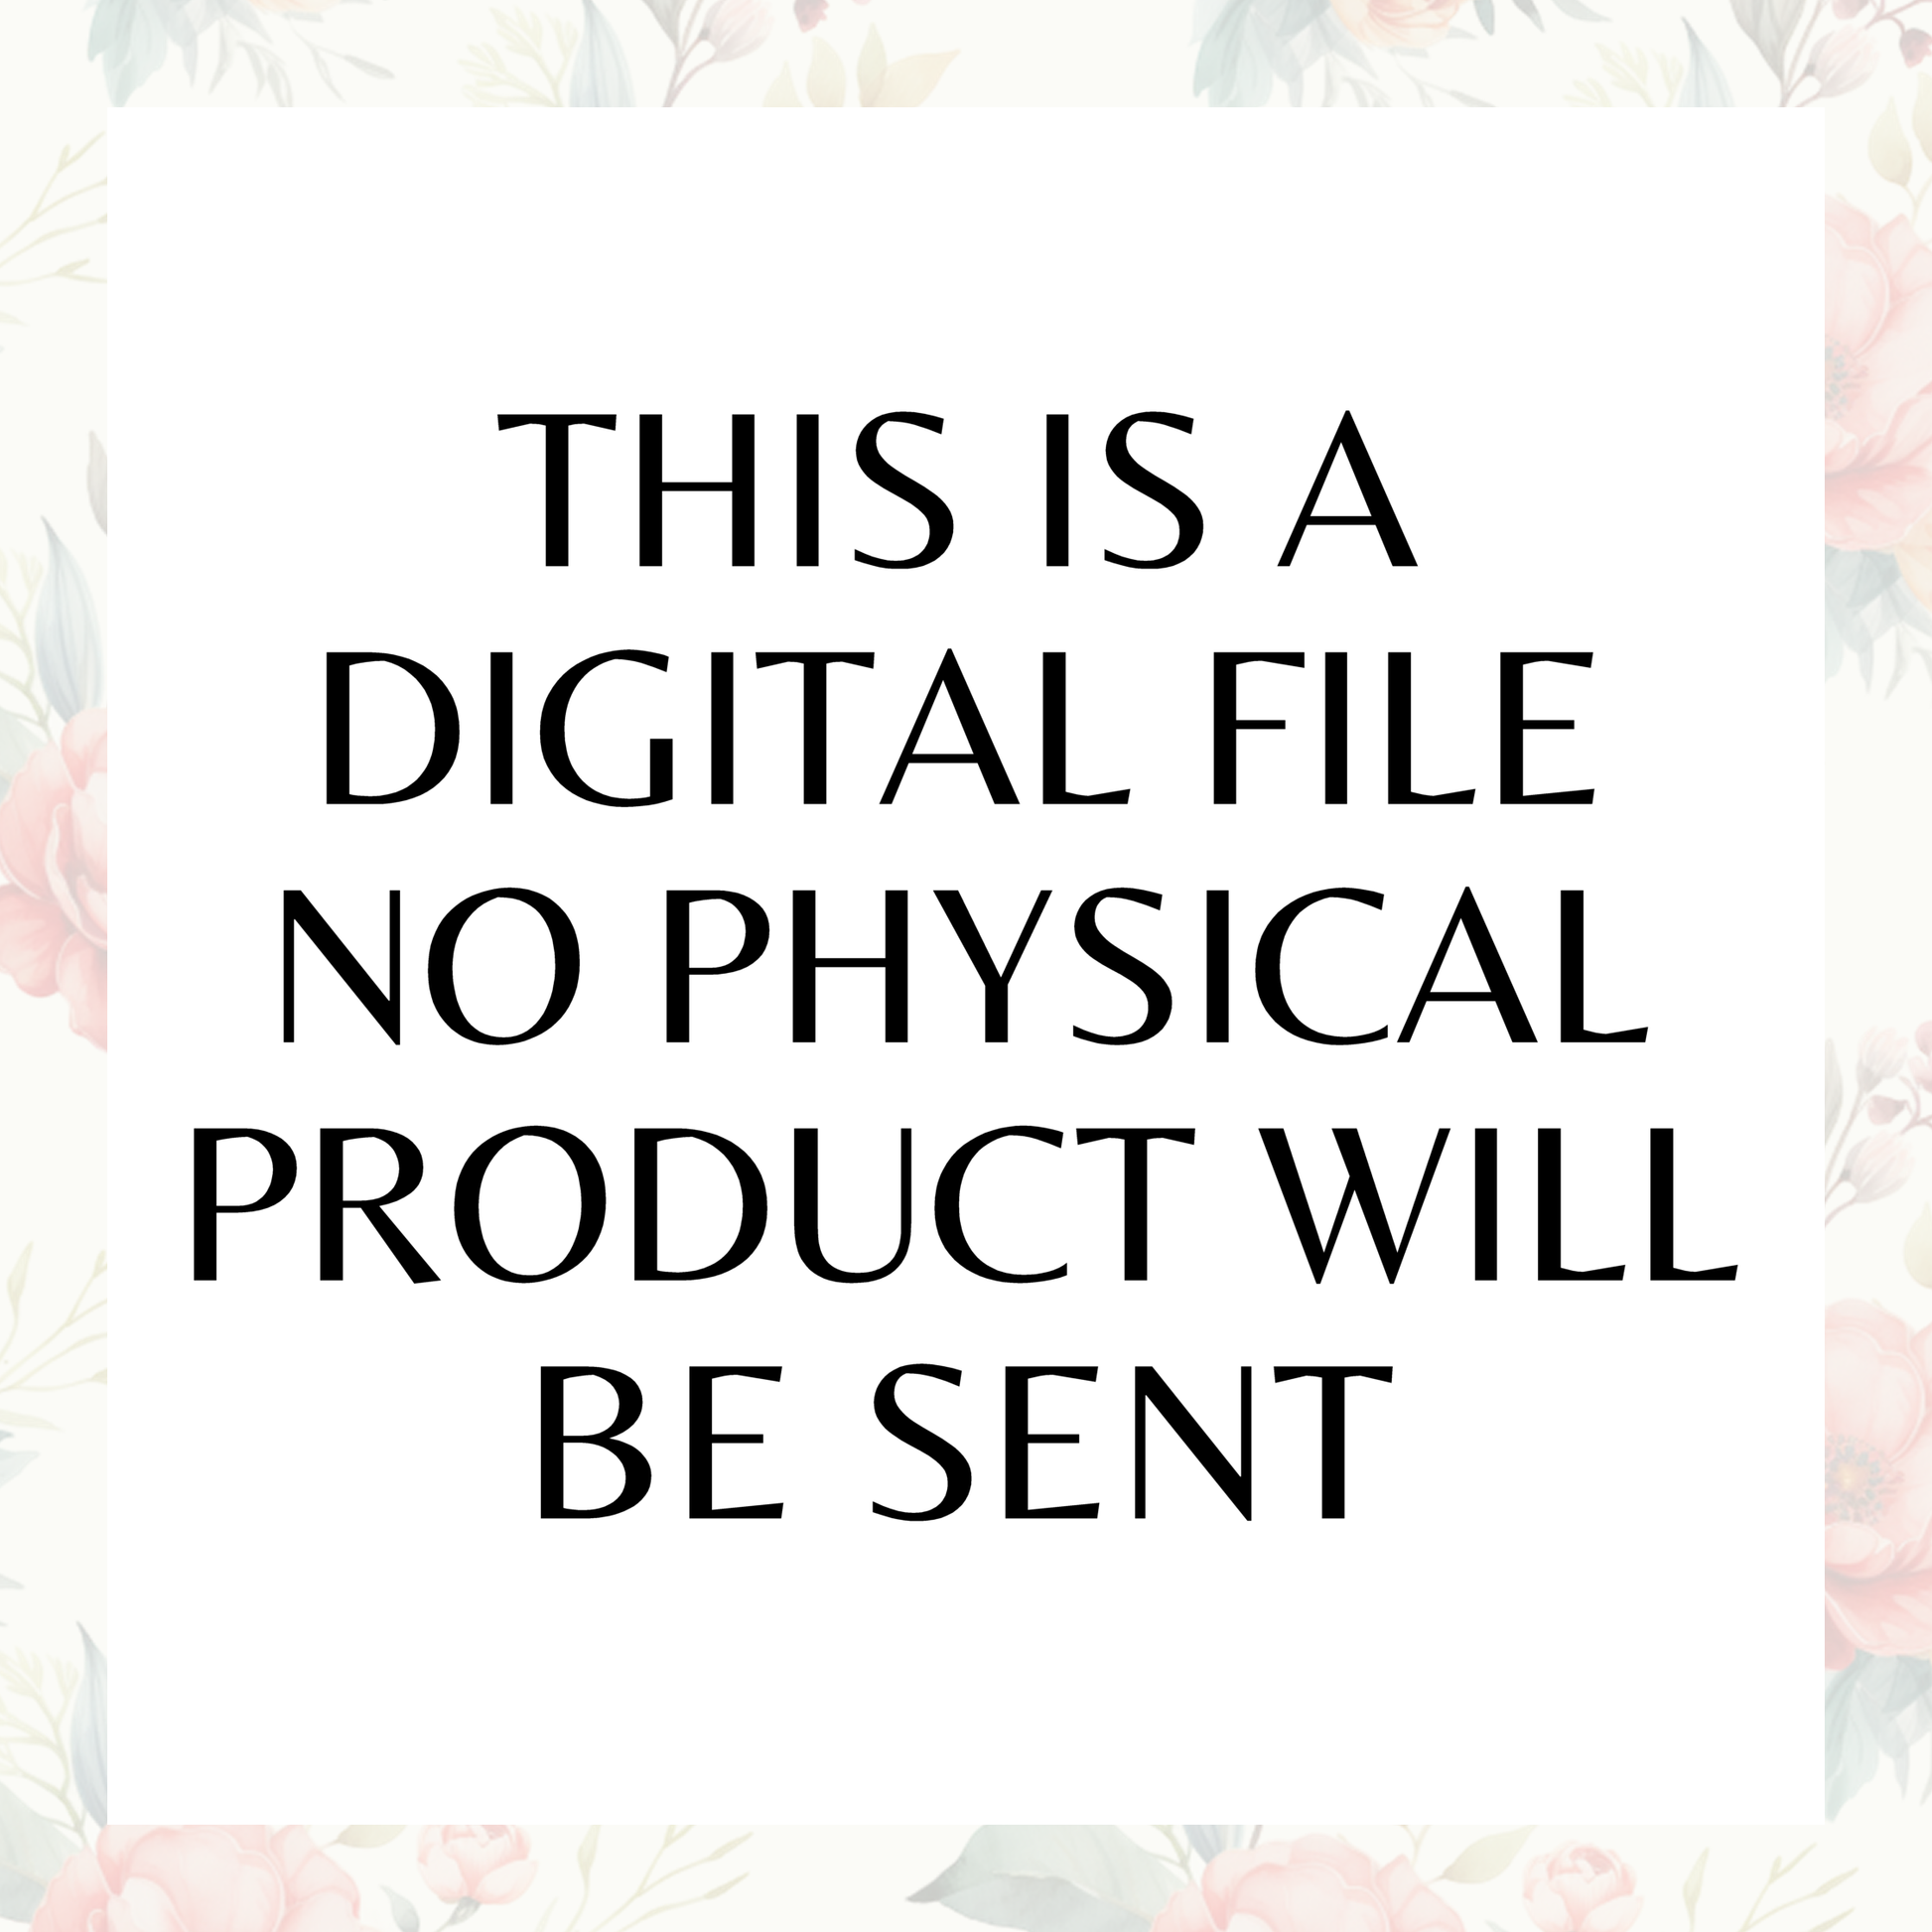 This is a digital file. No physical product will be sent.